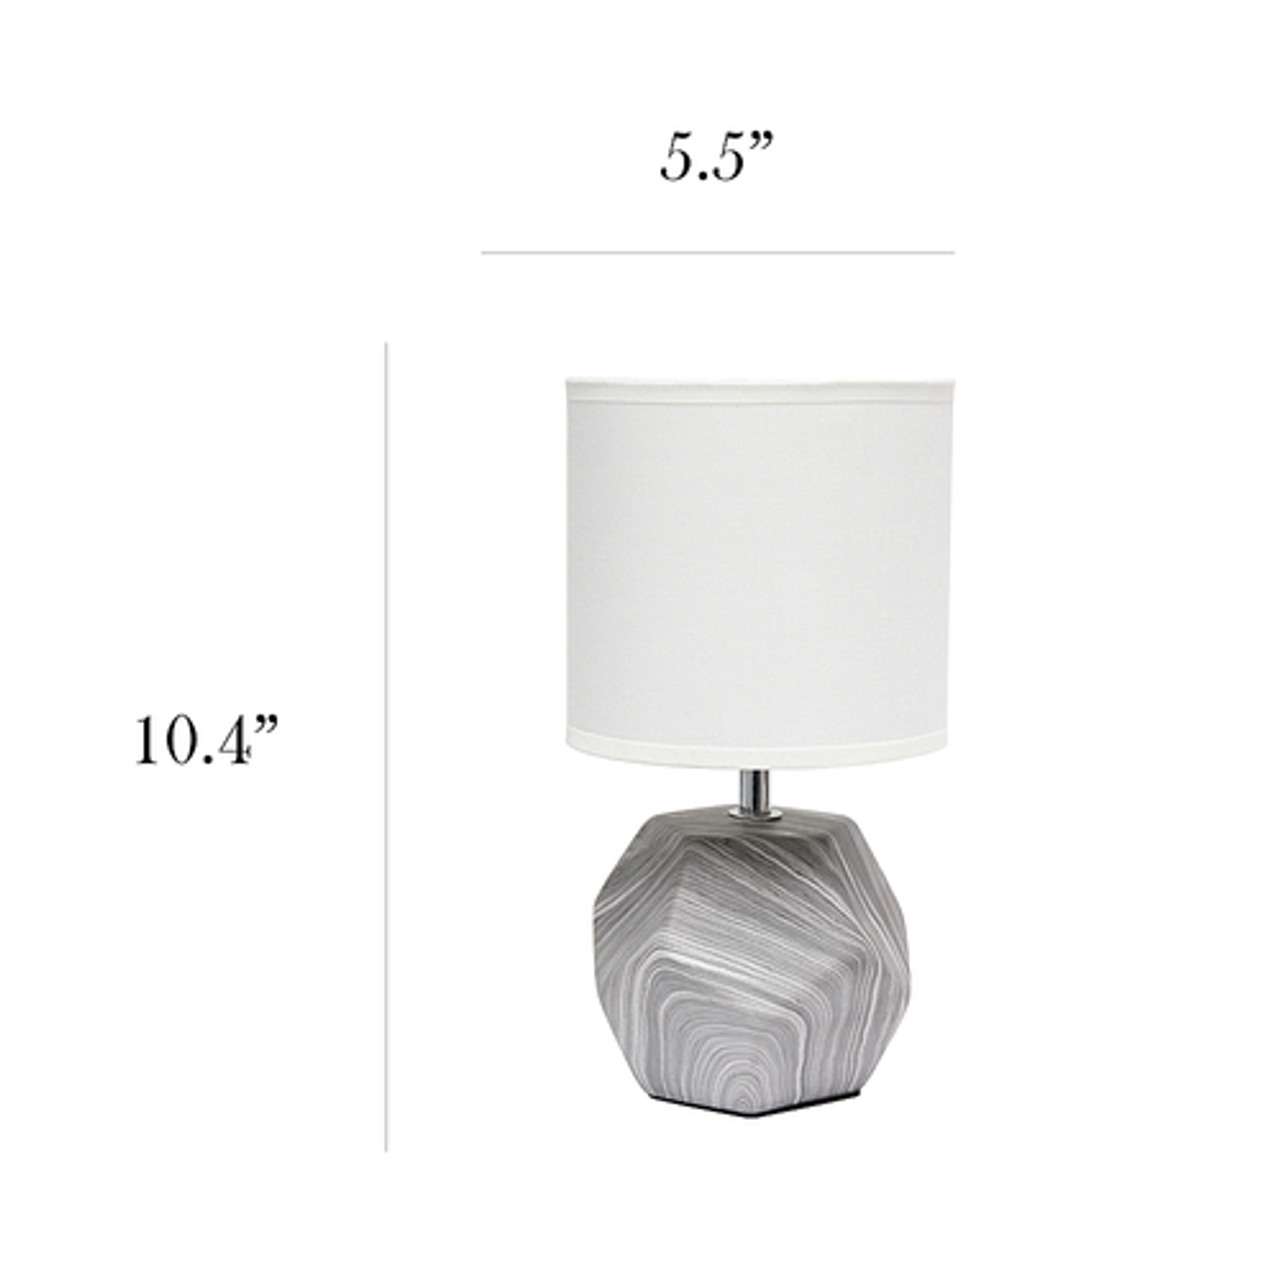 Simple Designs Round Prism Mini Table Lamp with White Fabric Shade - Marbled